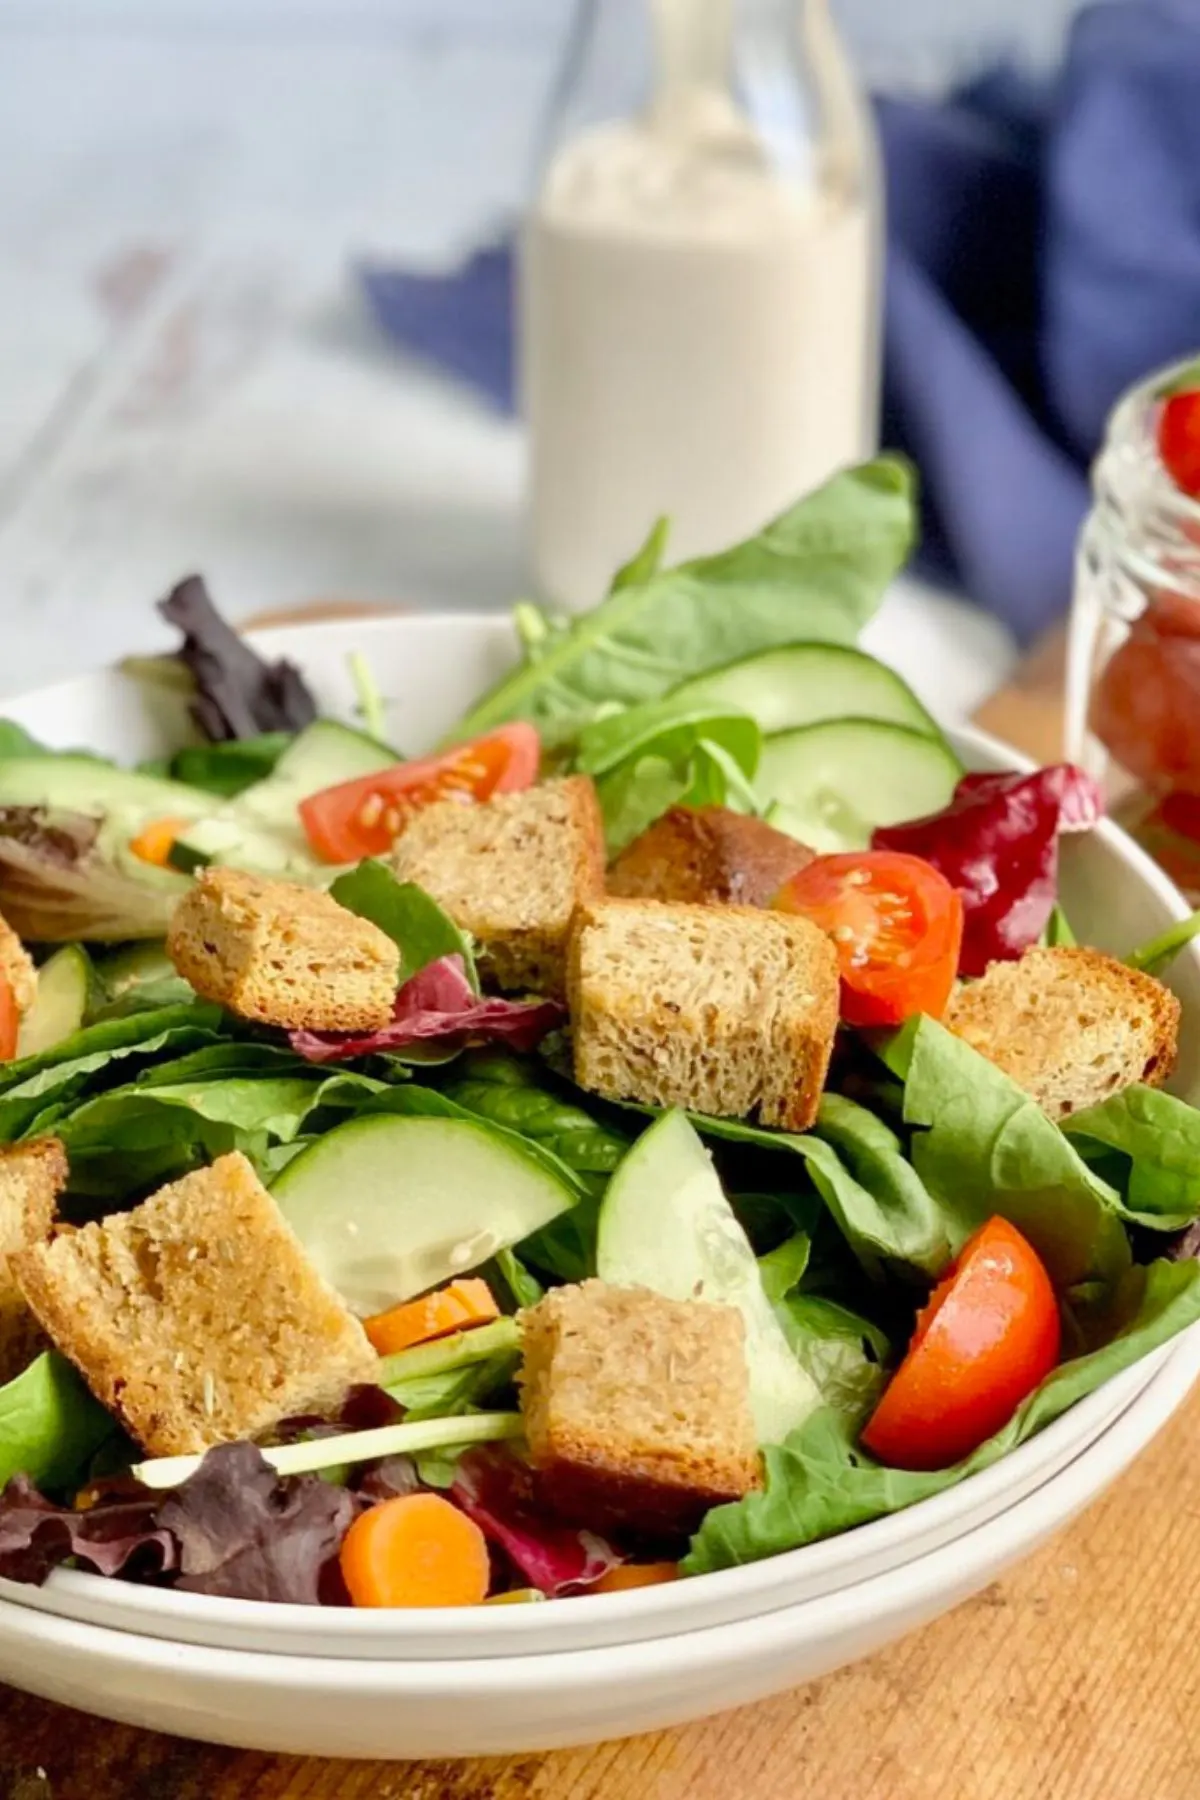 A gluten and dairy free salad with homemade gluten and dairy free croutons on top.